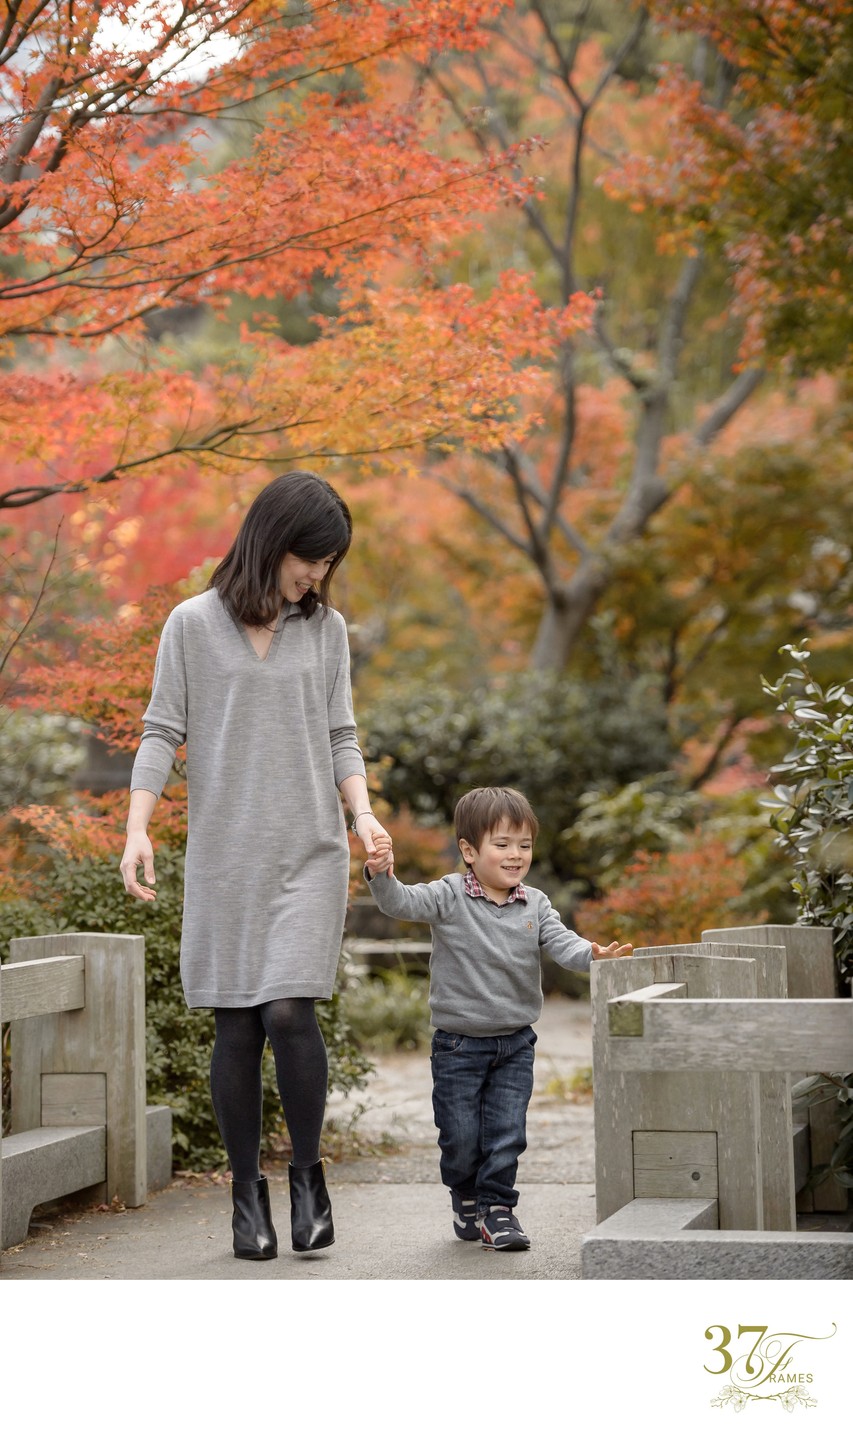 Why Fall in Tokyo is the best time for Family Photos